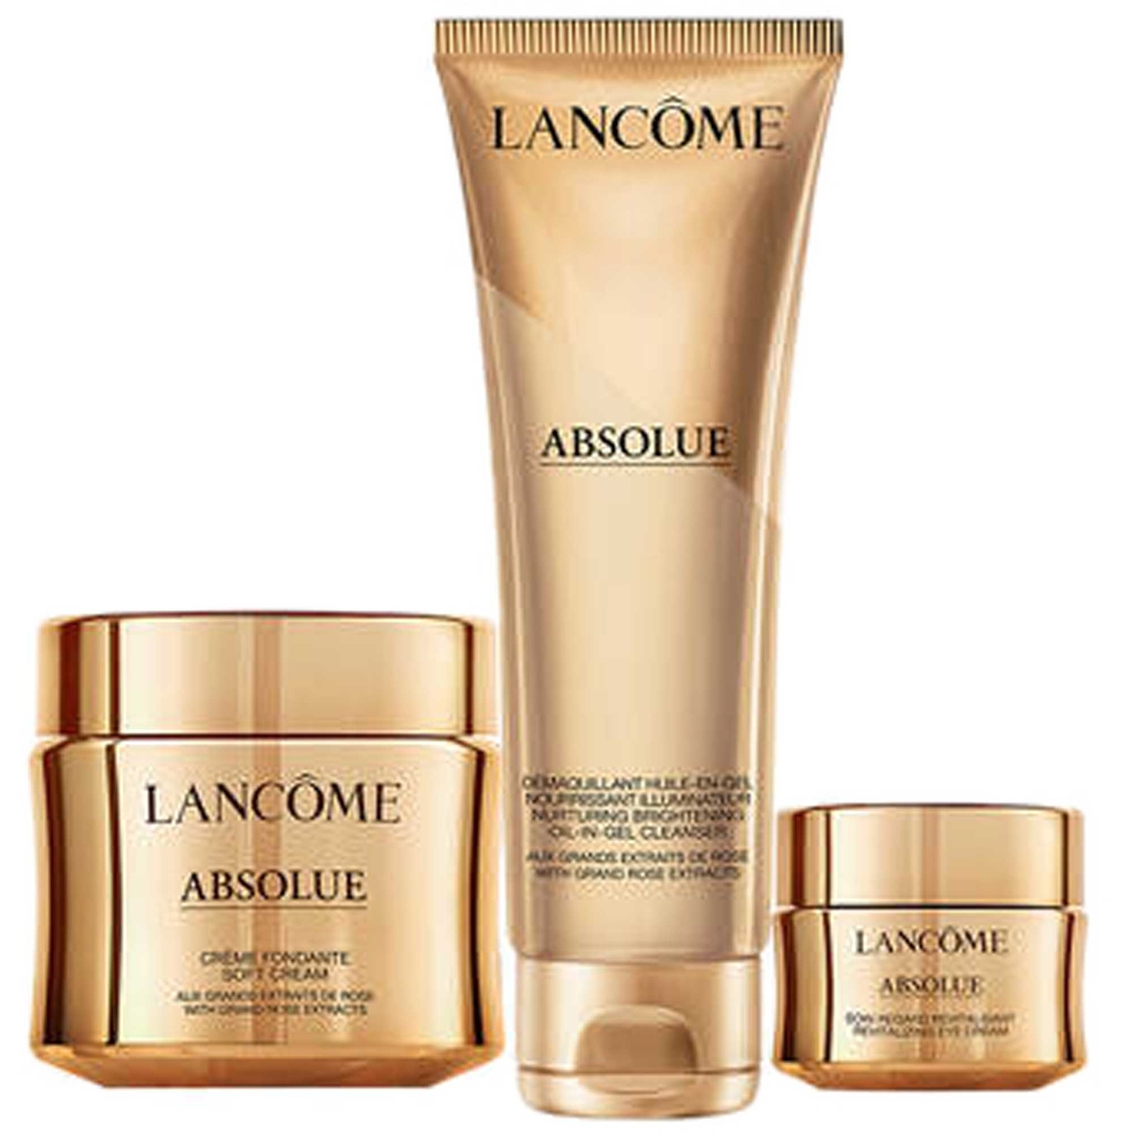 Lancome Absolue Set Skin Care T Sets Beauty And Health Shop The